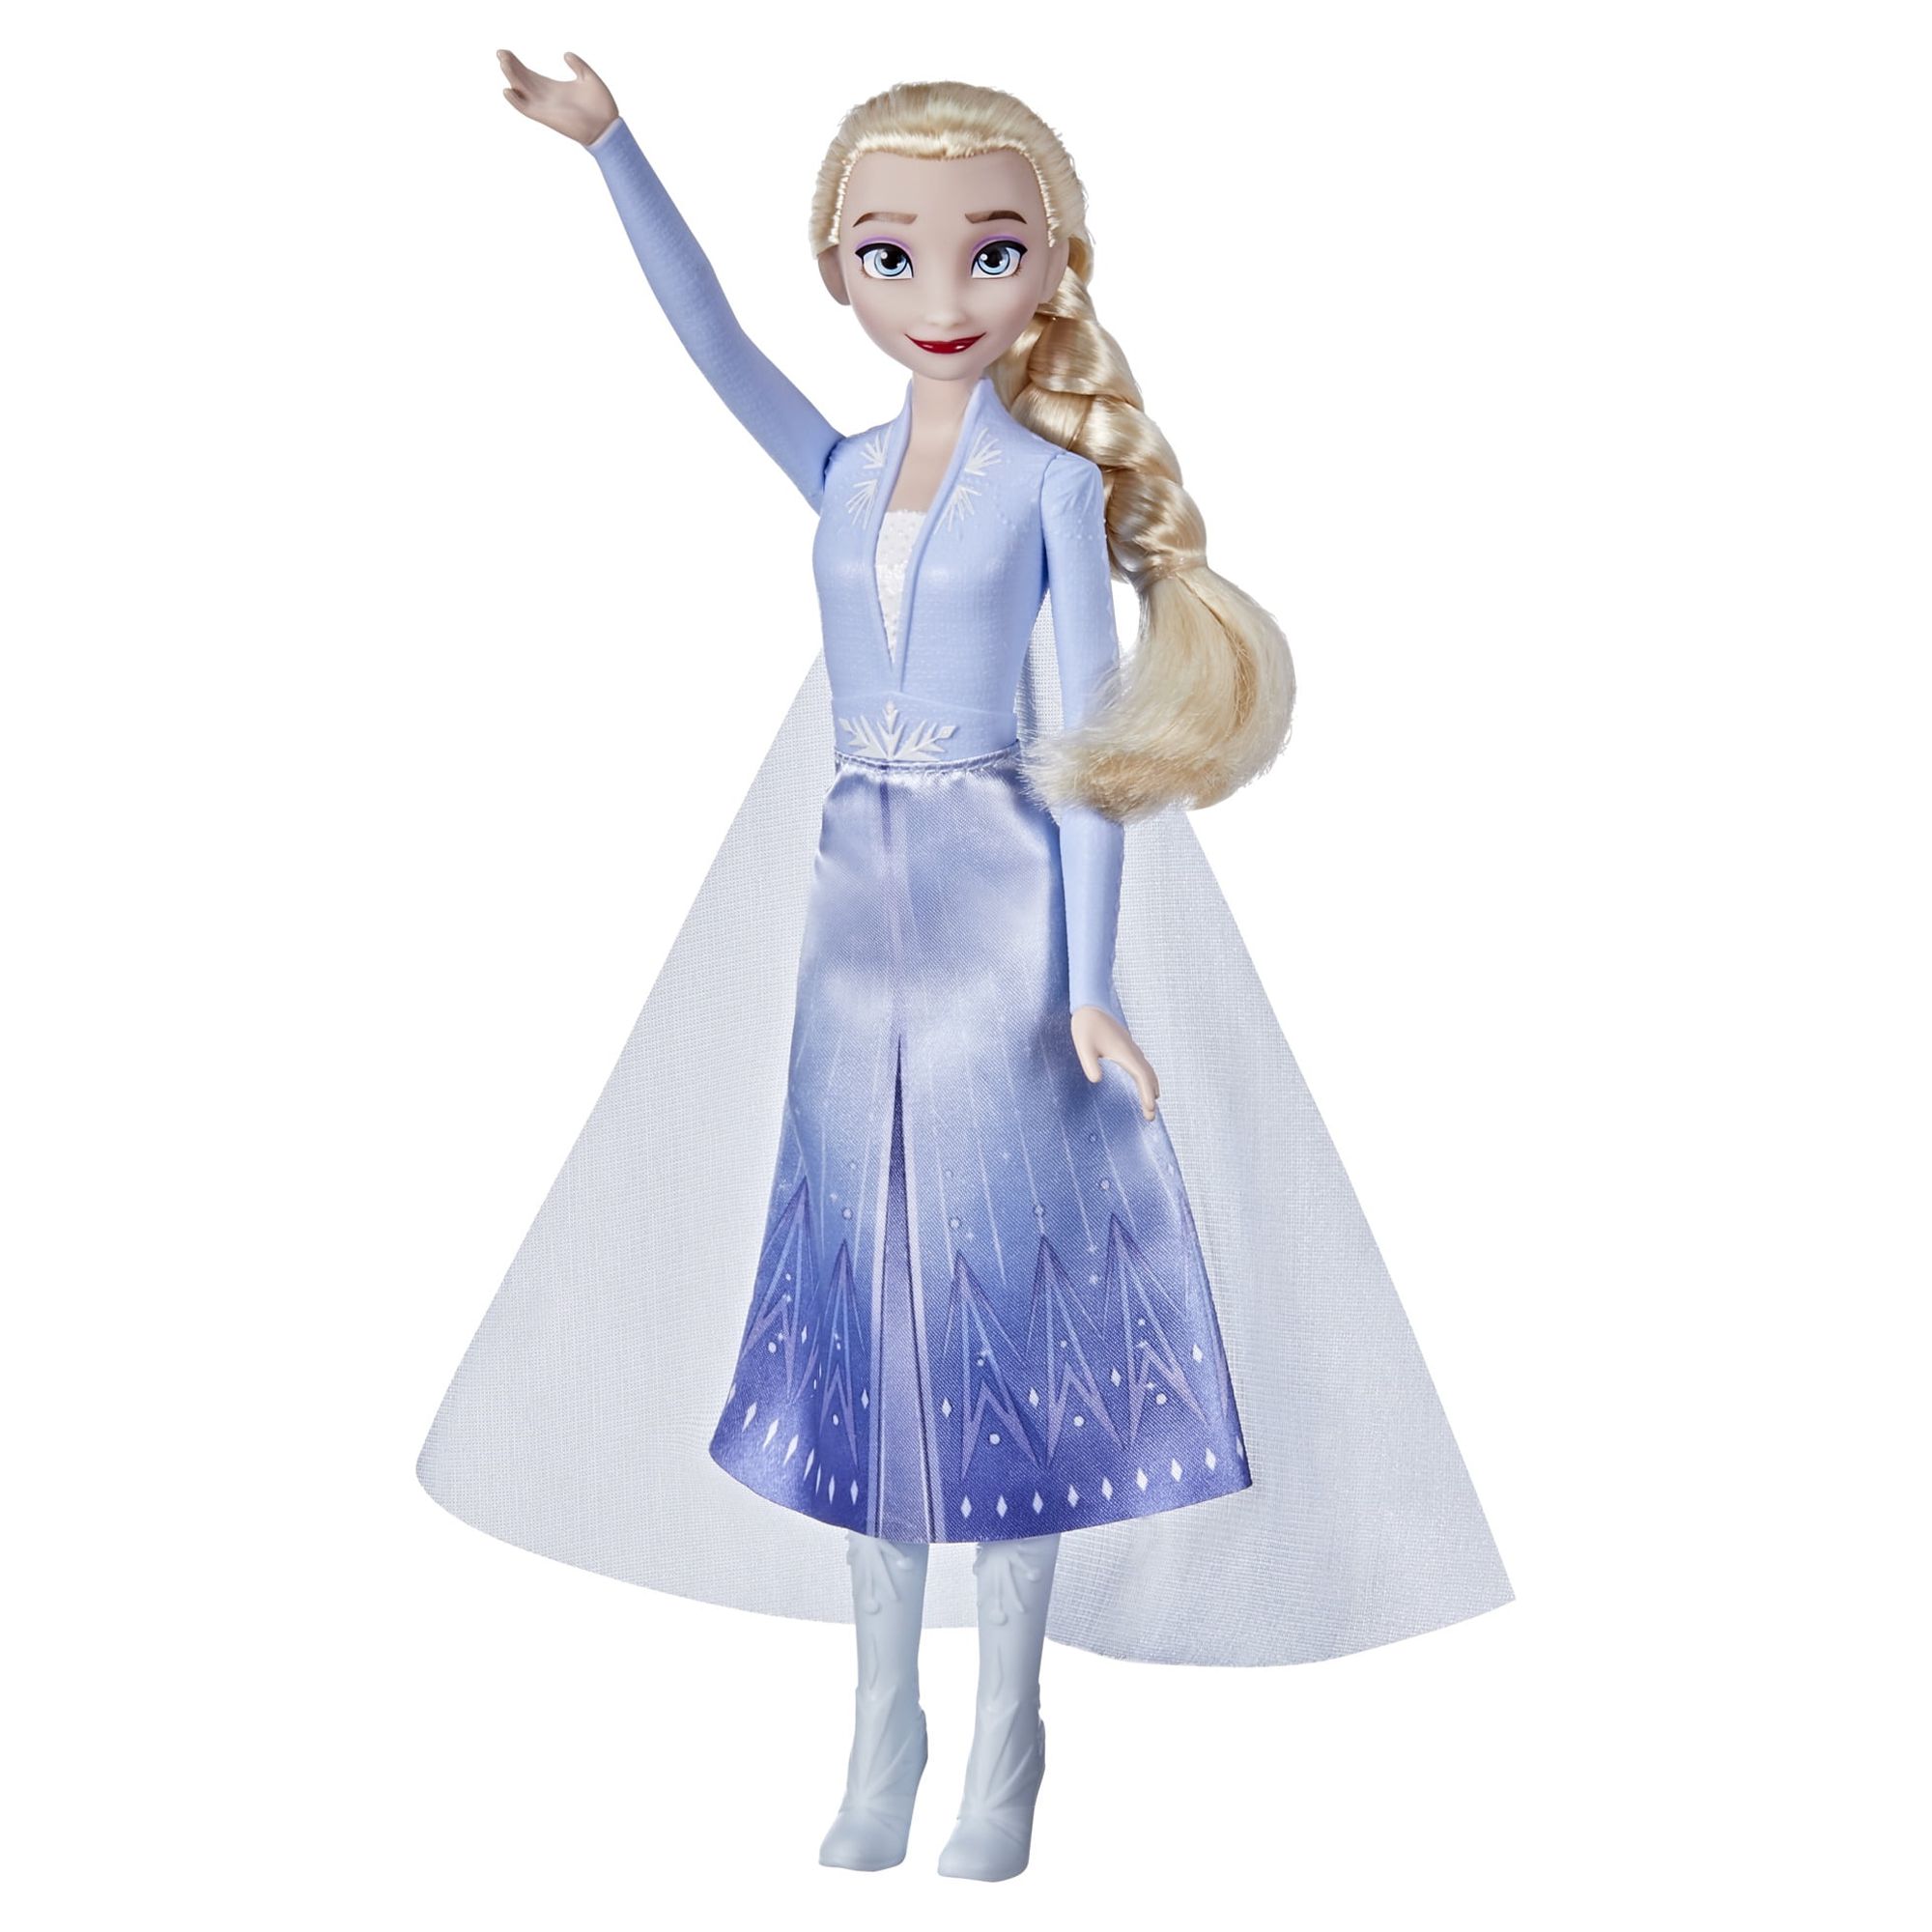 Disney's Frozen 2 Elsa Frozen Shimmer Fashion Doll, Accessories Included - image 1 of 11